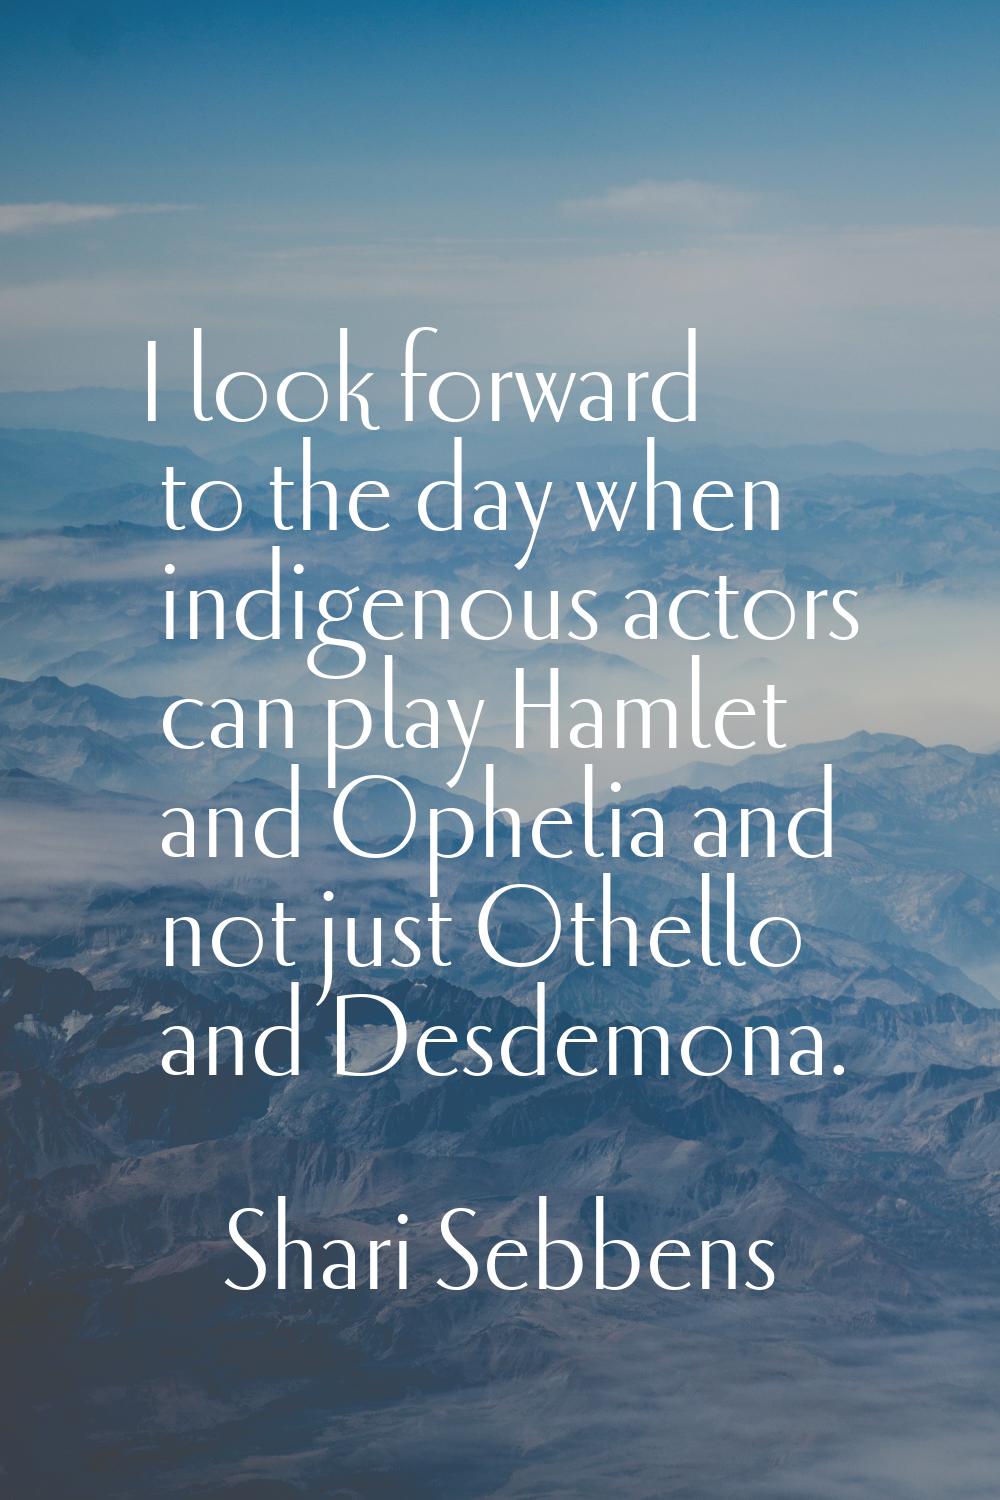 I look forward to the day when indigenous actors can play Hamlet and Ophelia and not just Othello a